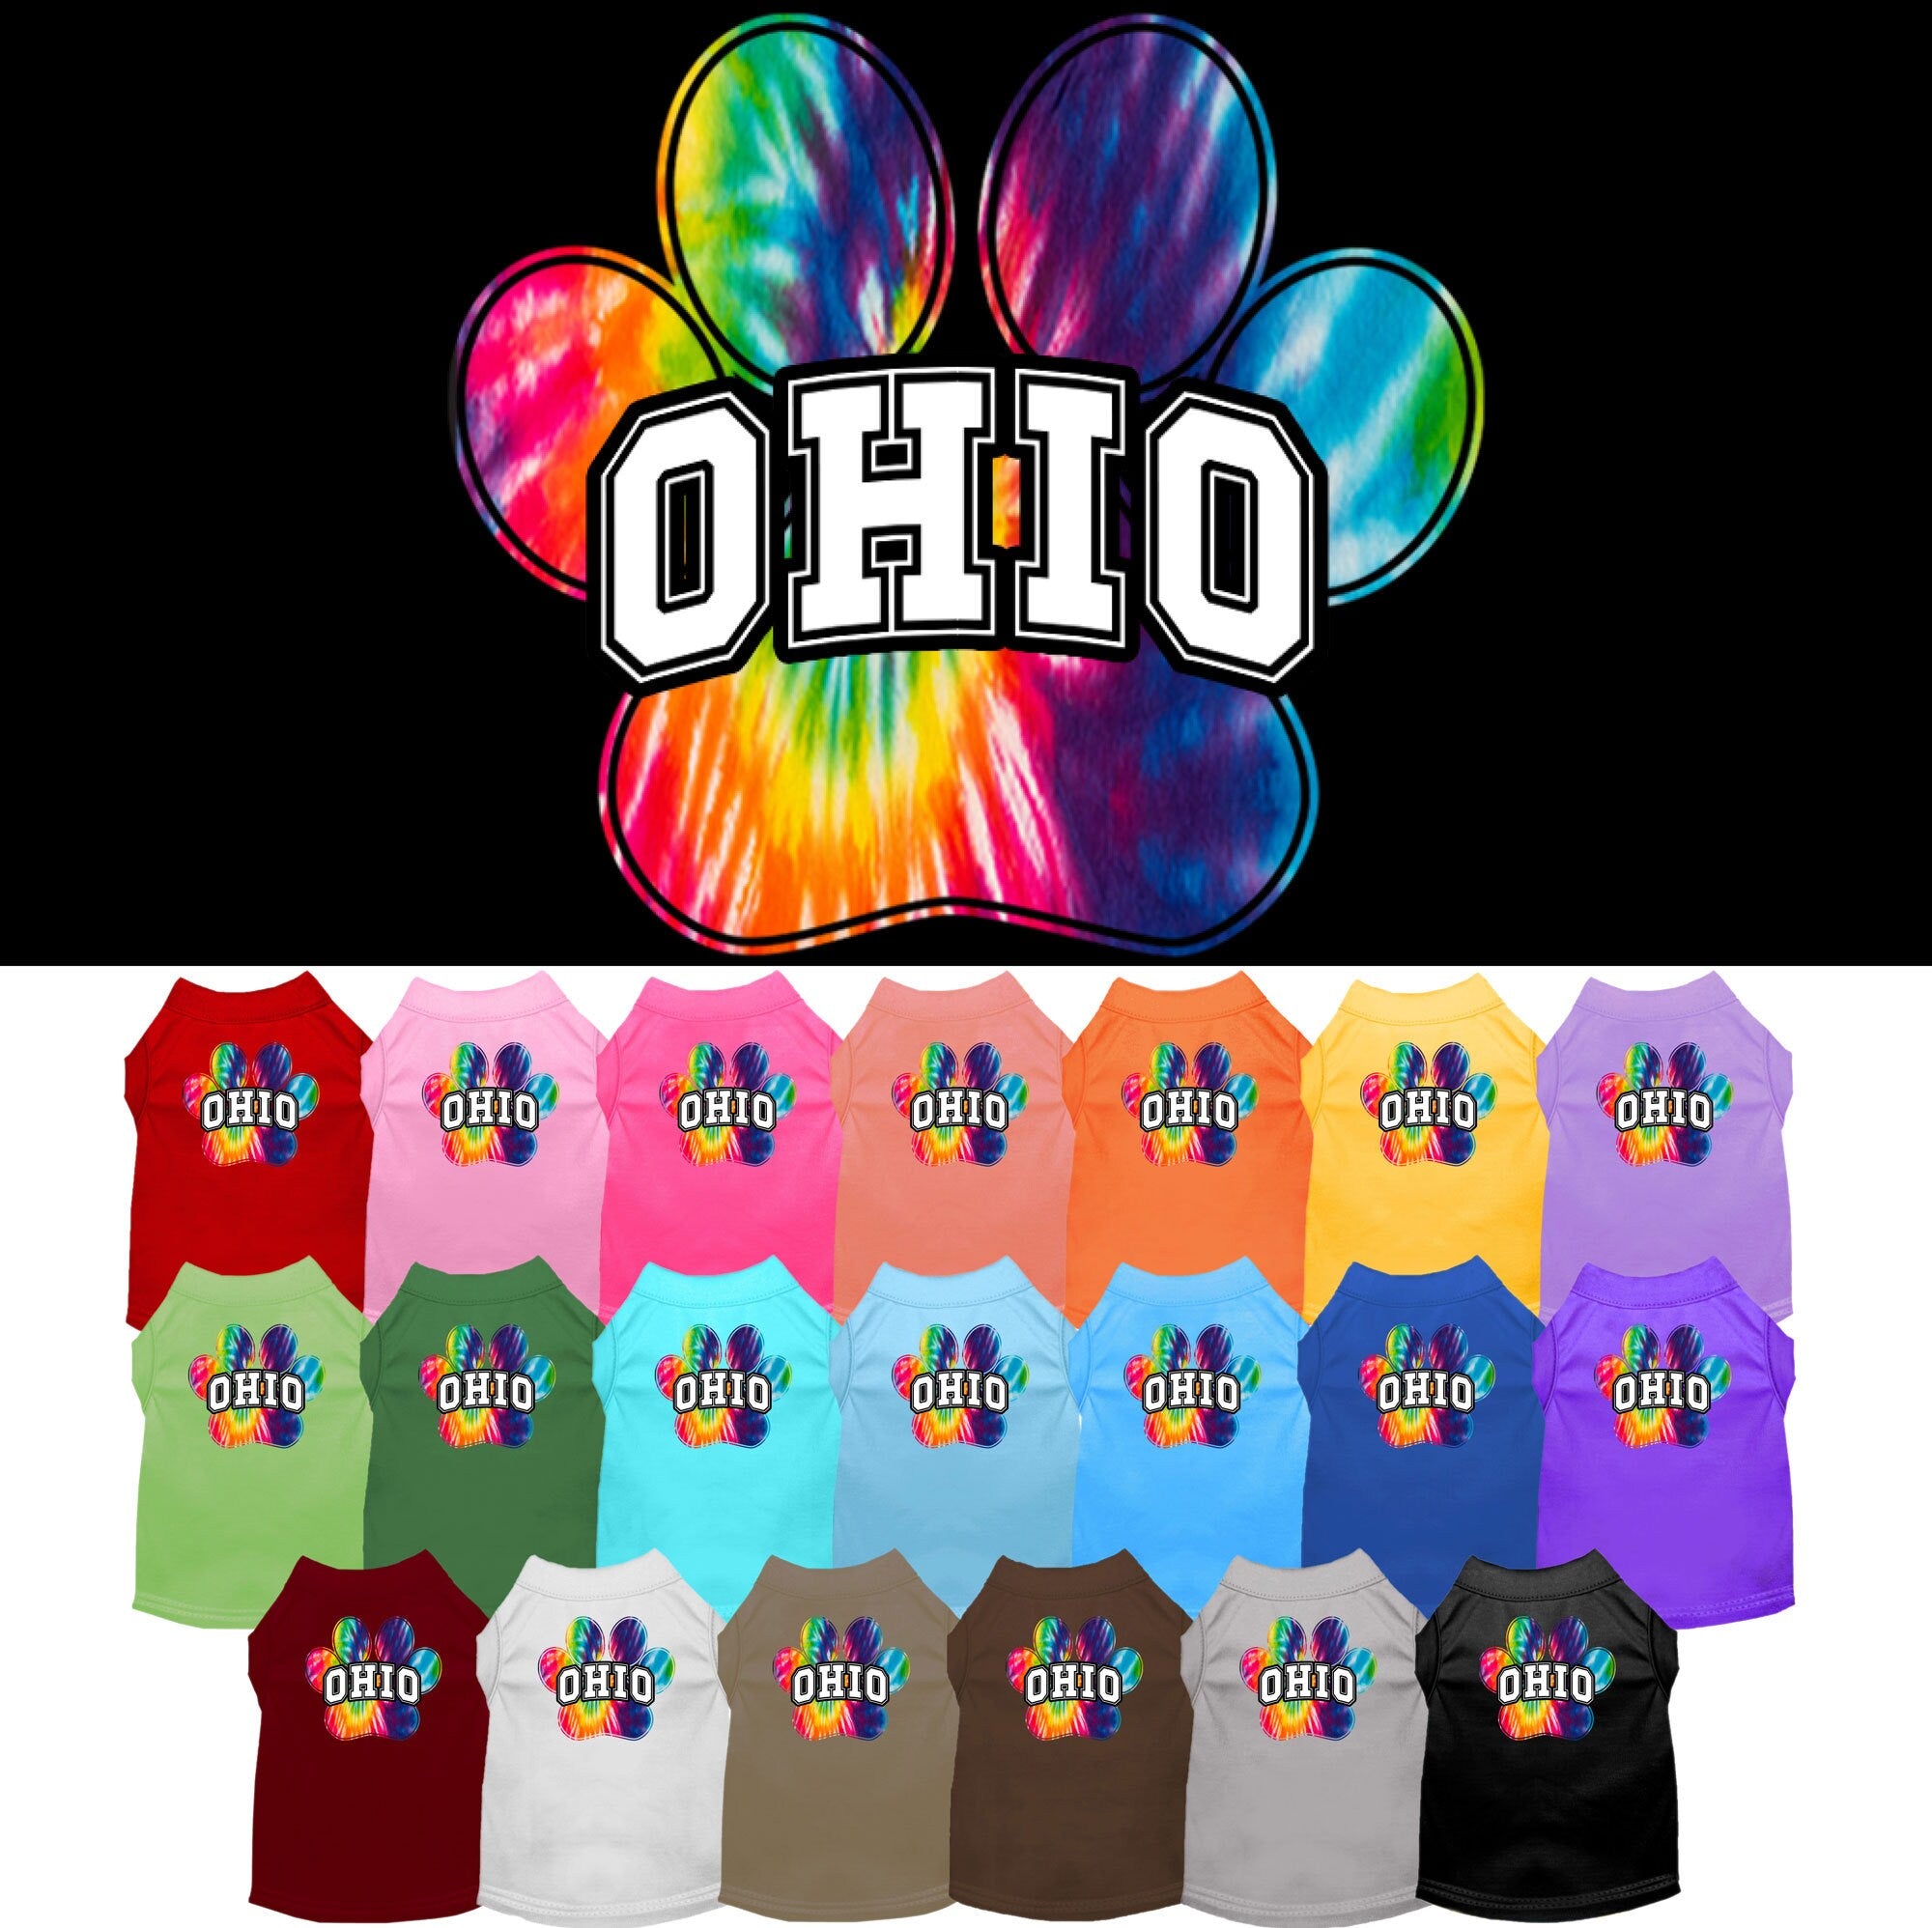 Pet Dog & Cat Screen Printed Shirt for Small to Medium Pets (Sizes XS-XL), &quot;Ohio Bright Tie Dye&quot;